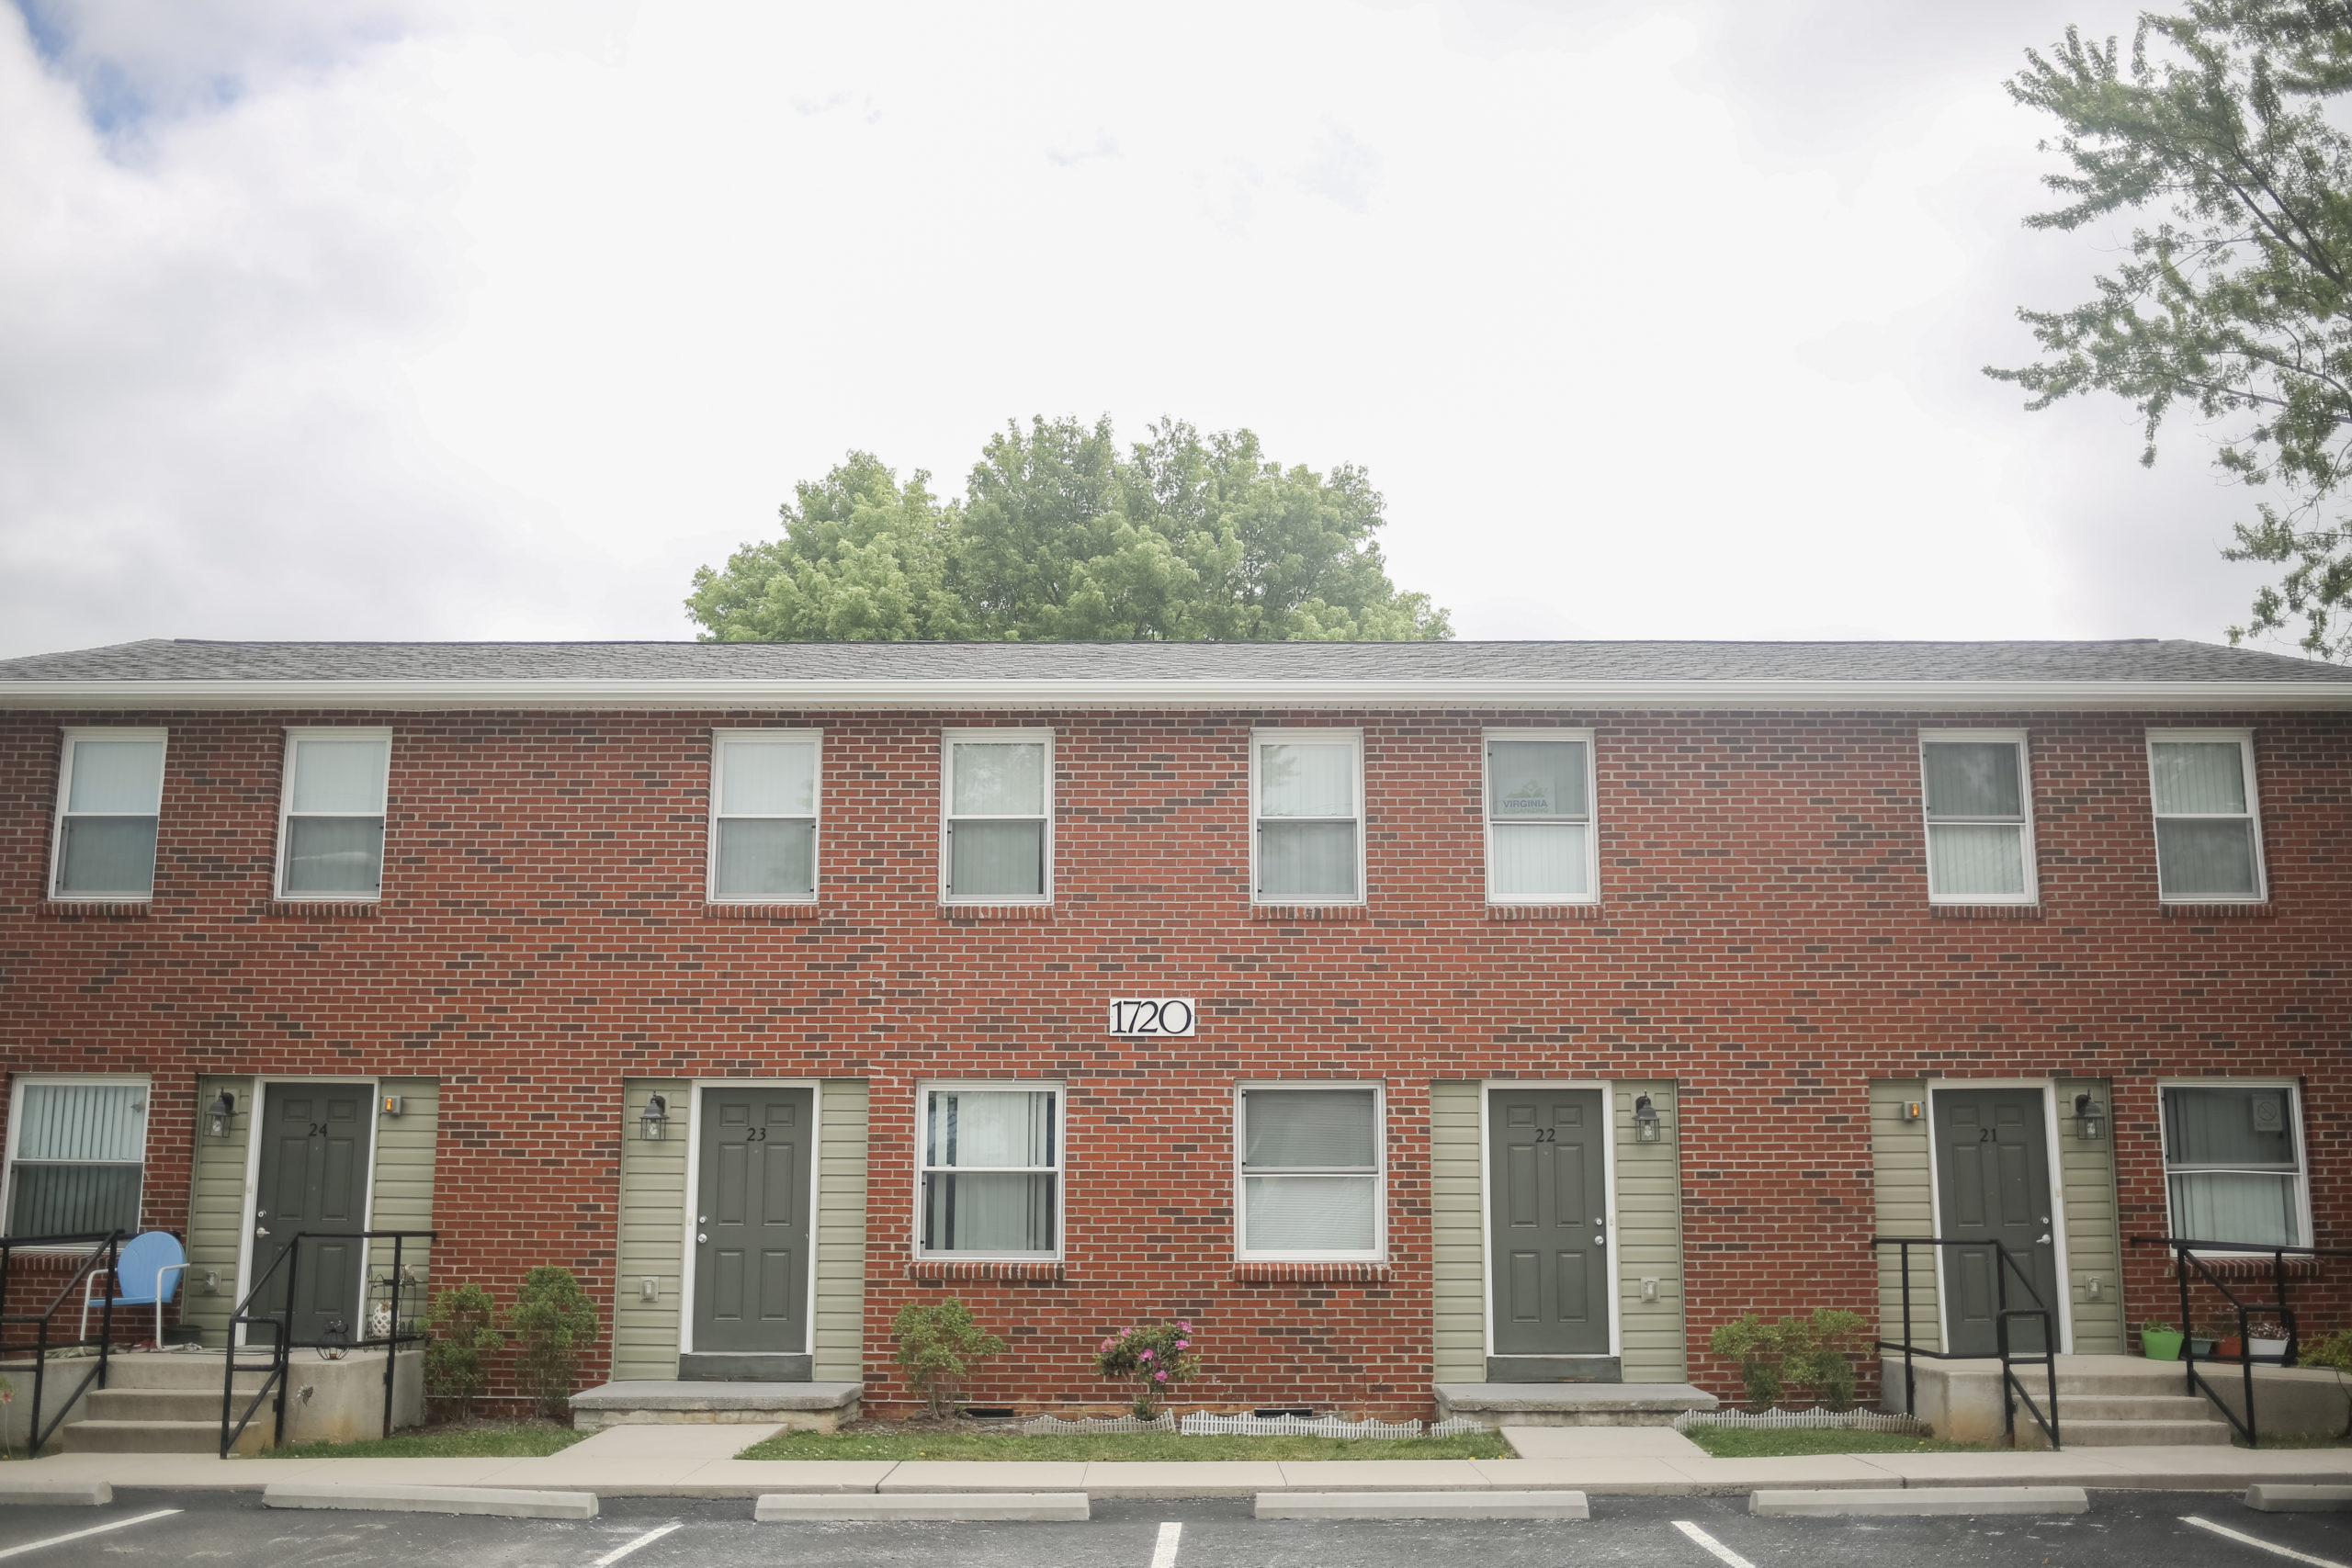 LINDEN GROVE TOWNHOME APARTMENTS